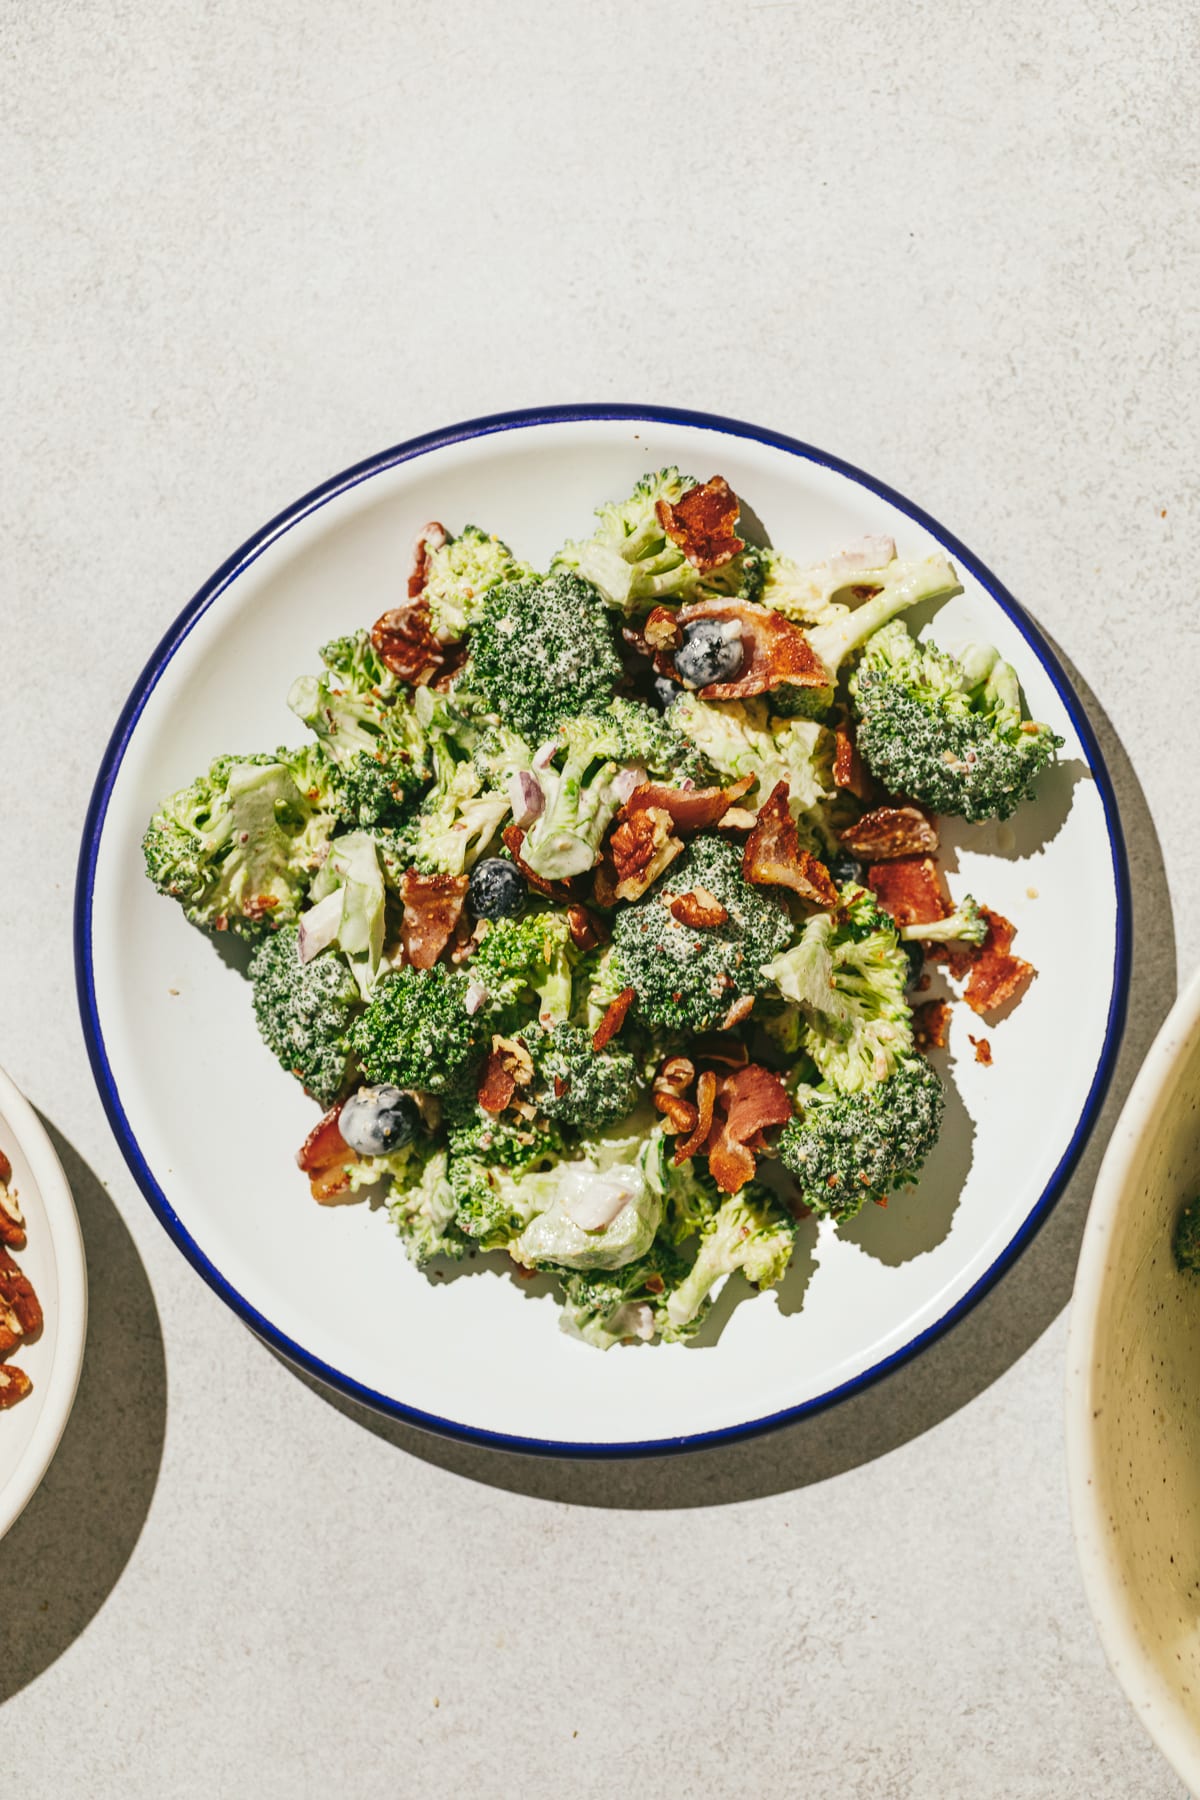 Broccoli crunch salad on a serving plate.